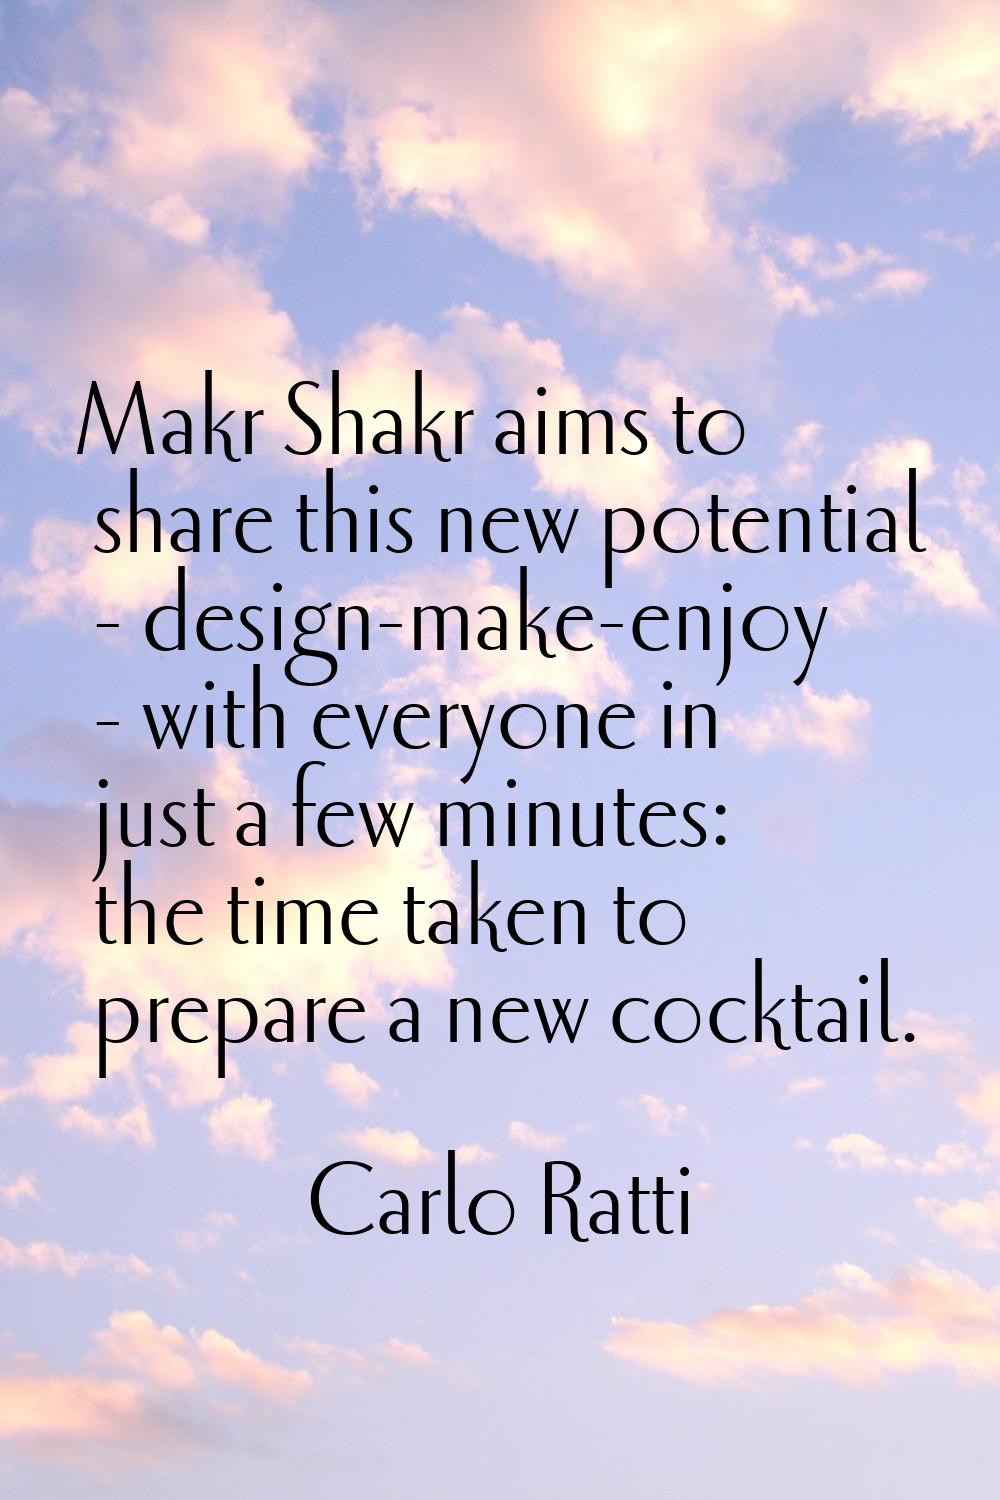 Makr Shakr aims to share this new potential - design-make-enjoy - with everyone in just a few minut